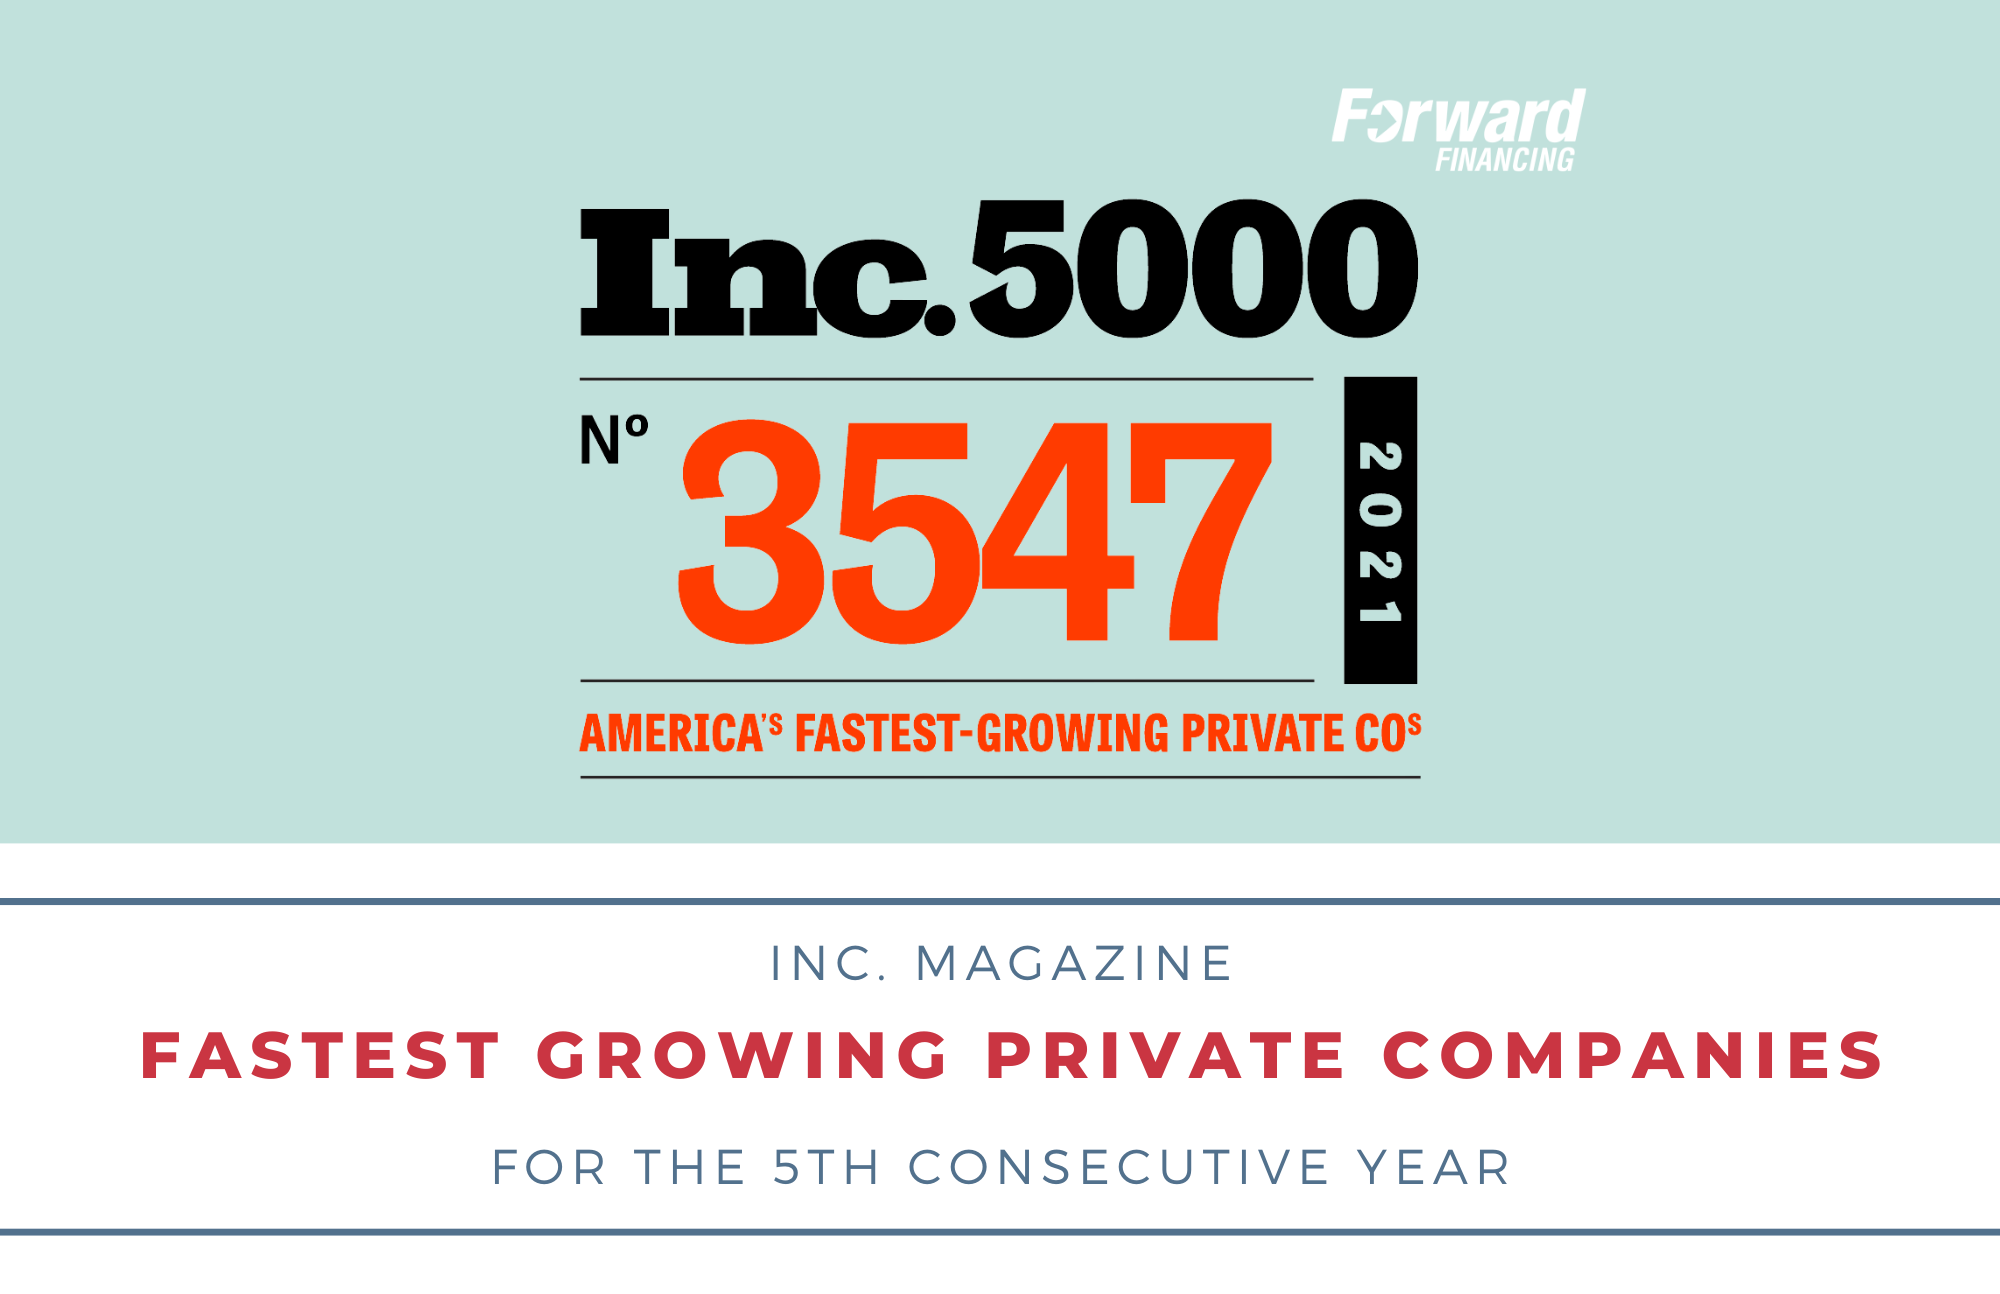 Forward Financing on Inc. 5000 for 5th Year Image